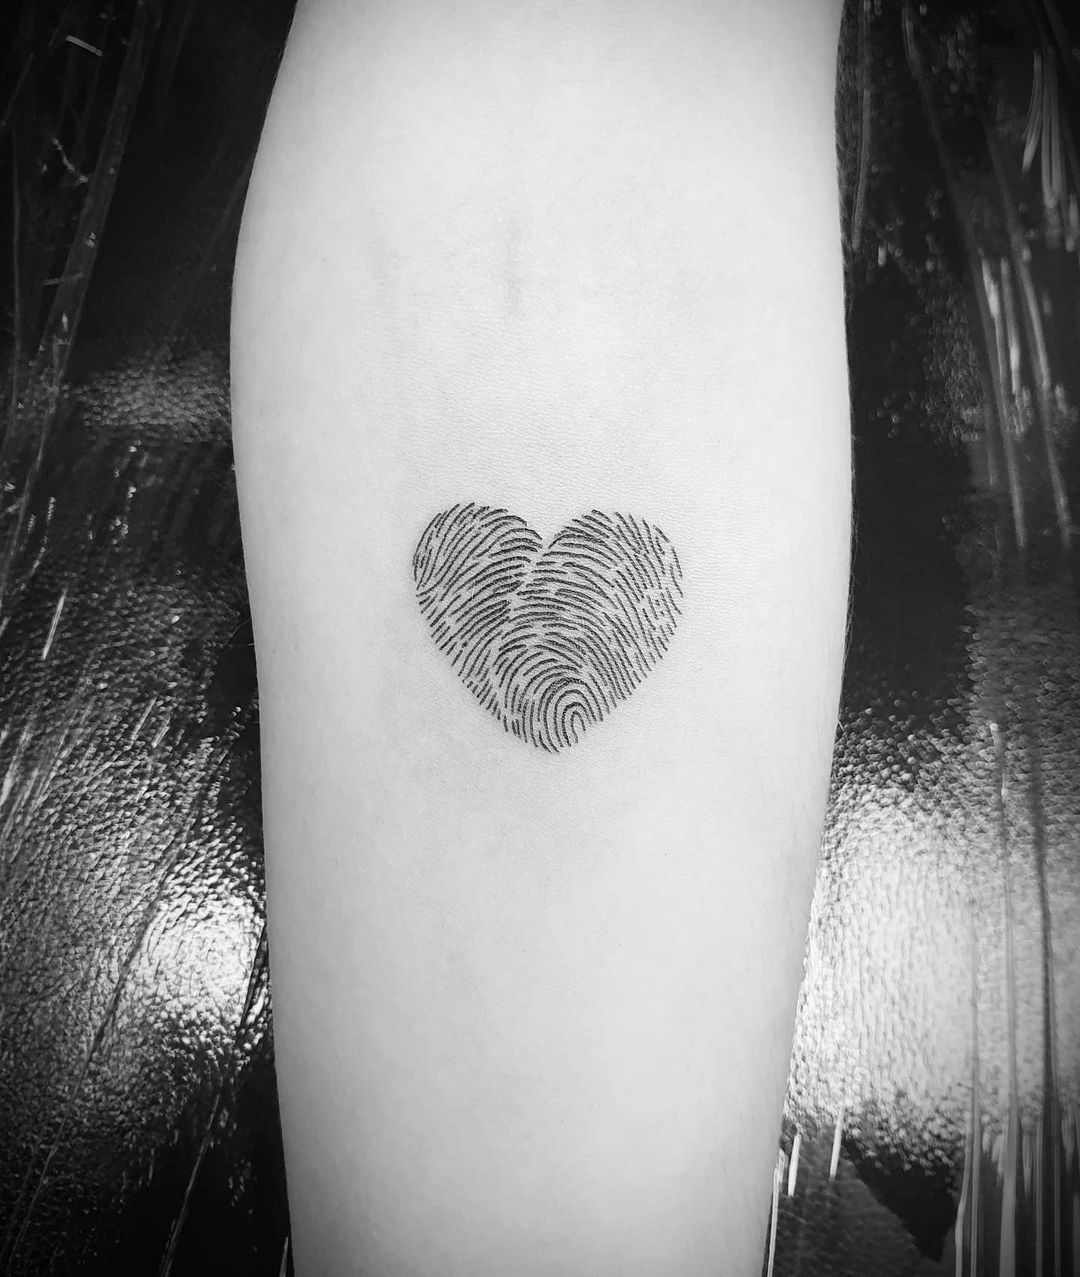 11+ Girly Heart Tattoo Ideas That Will Blow Your Mind! - alexie